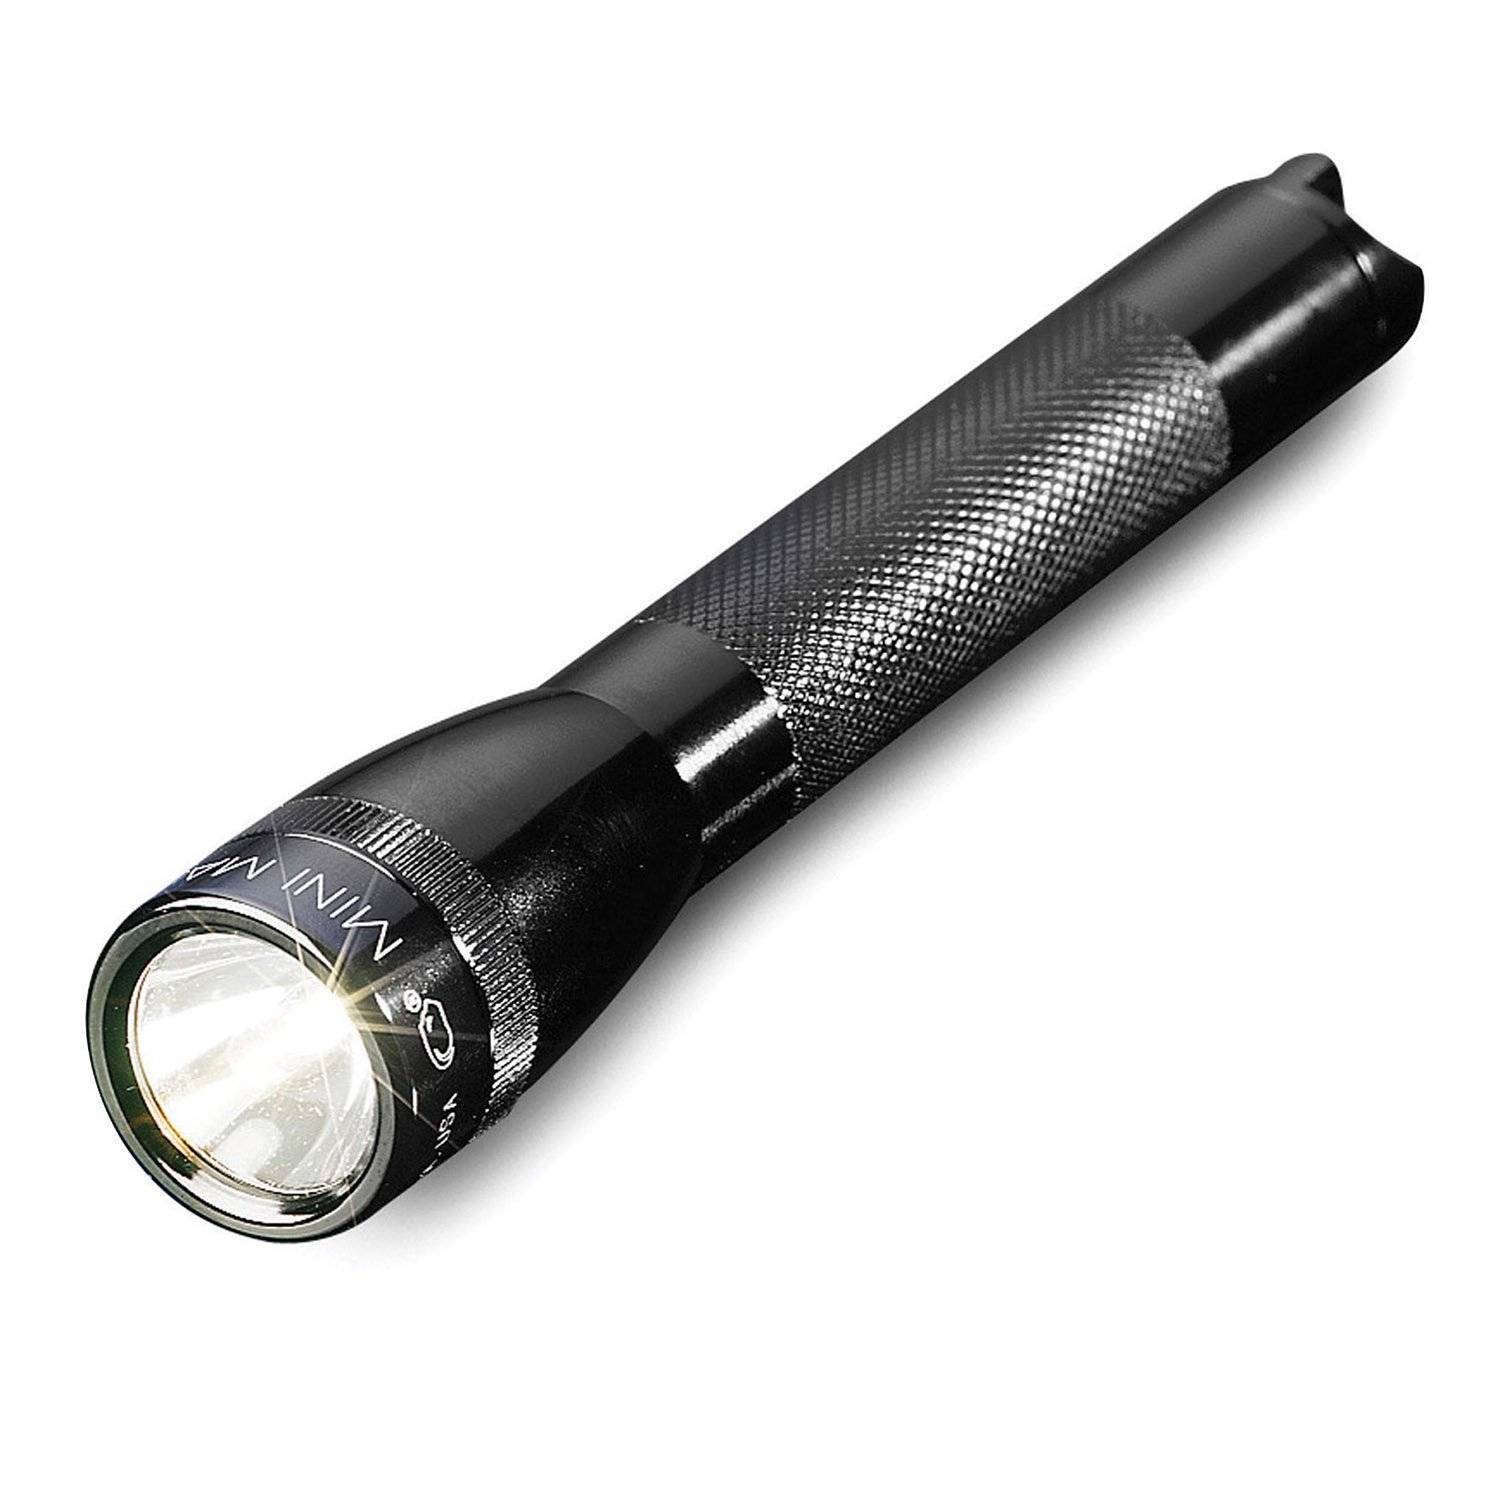 clicky Mini MagLite AA Torch/flashlight Push Button End/Tail Cap Switch 